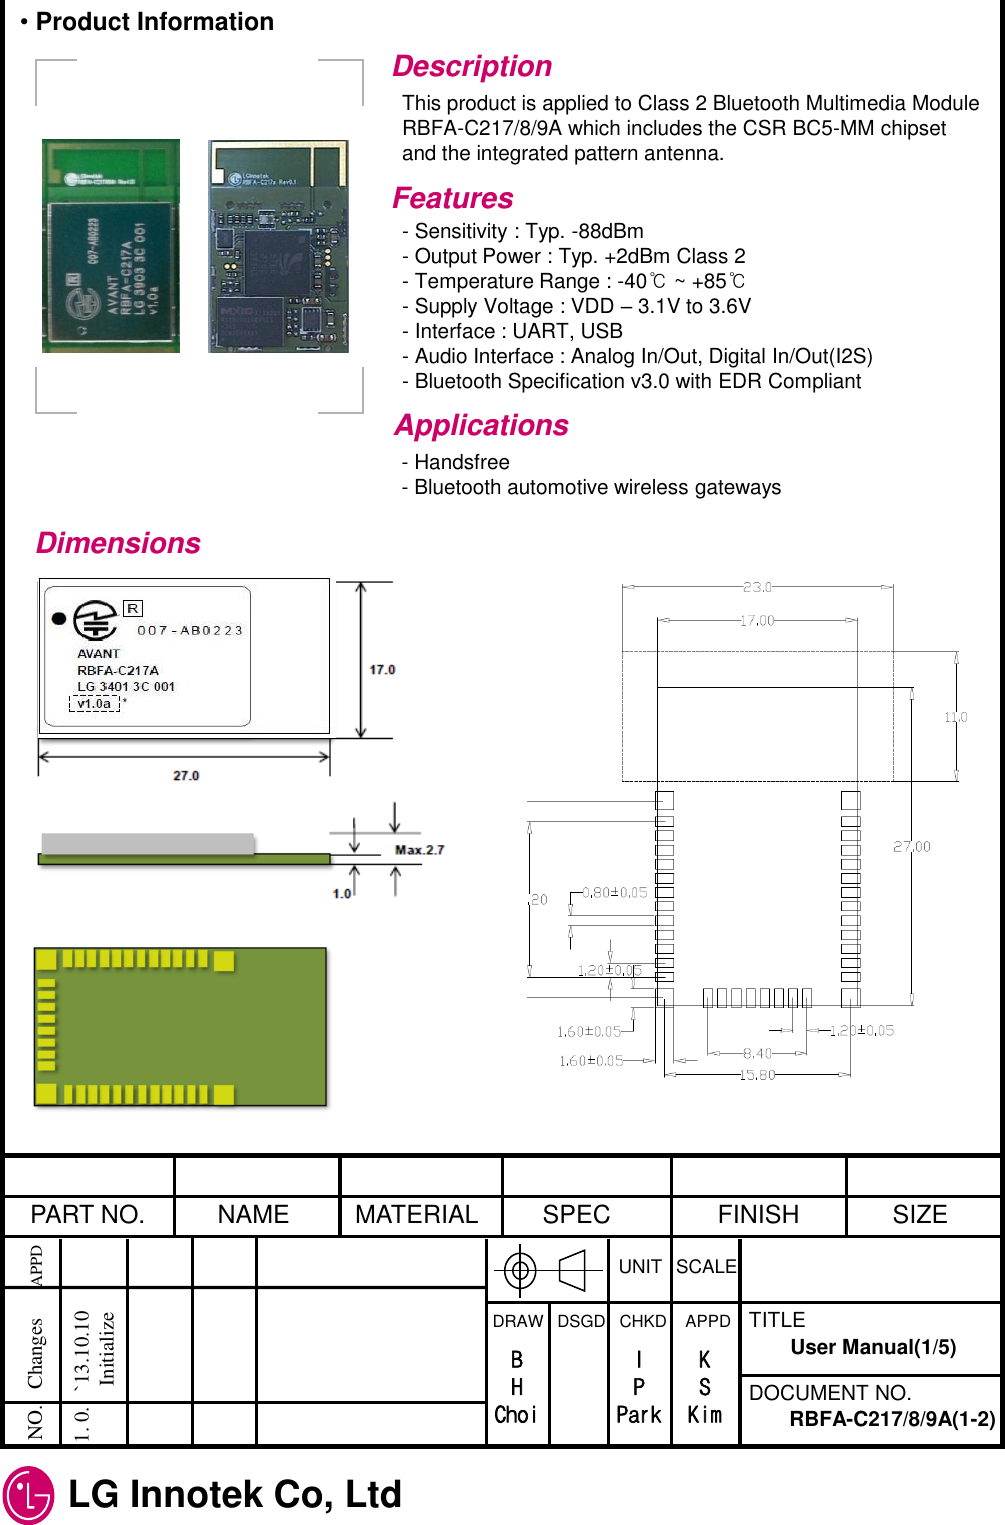  LG Innotek Co, Ltd   PART NO.  NAME  MATERIAL  SPEC  FINISH  SIZE UNIT  SCALE DRAW   DSGD   CHKD    APPD  TITLE DOCUMENT NO. NO.   Changes      APPD  1. 0.   `13.10.10             Initialize RBFA-C217/8/9A(1-2) User Manual(1/5) B H Choi I P Park K S Kim Description This product is applied to Class 2 Bluetooth Multimedia Module RBFA-C217/8/9A which includes the CSR BC5-MM chipset and the integrated pattern antenna. Features - Sensitivity : Typ. -88dBm - Output Power : Typ. +2dBm Class 2 - Temperature Range : -40℃ ~ +85℃ - Supply Voltage : VDD – 3.1V to 3.6V - Interface : UART, USB - Audio Interface : Analog In/Out, Digital In/Out(I2S) - Bluetooth Specification v3.0 with EDR Compliant Applications - Handsfree - Bluetooth automotive wireless gateways Dimensions • Product Information 